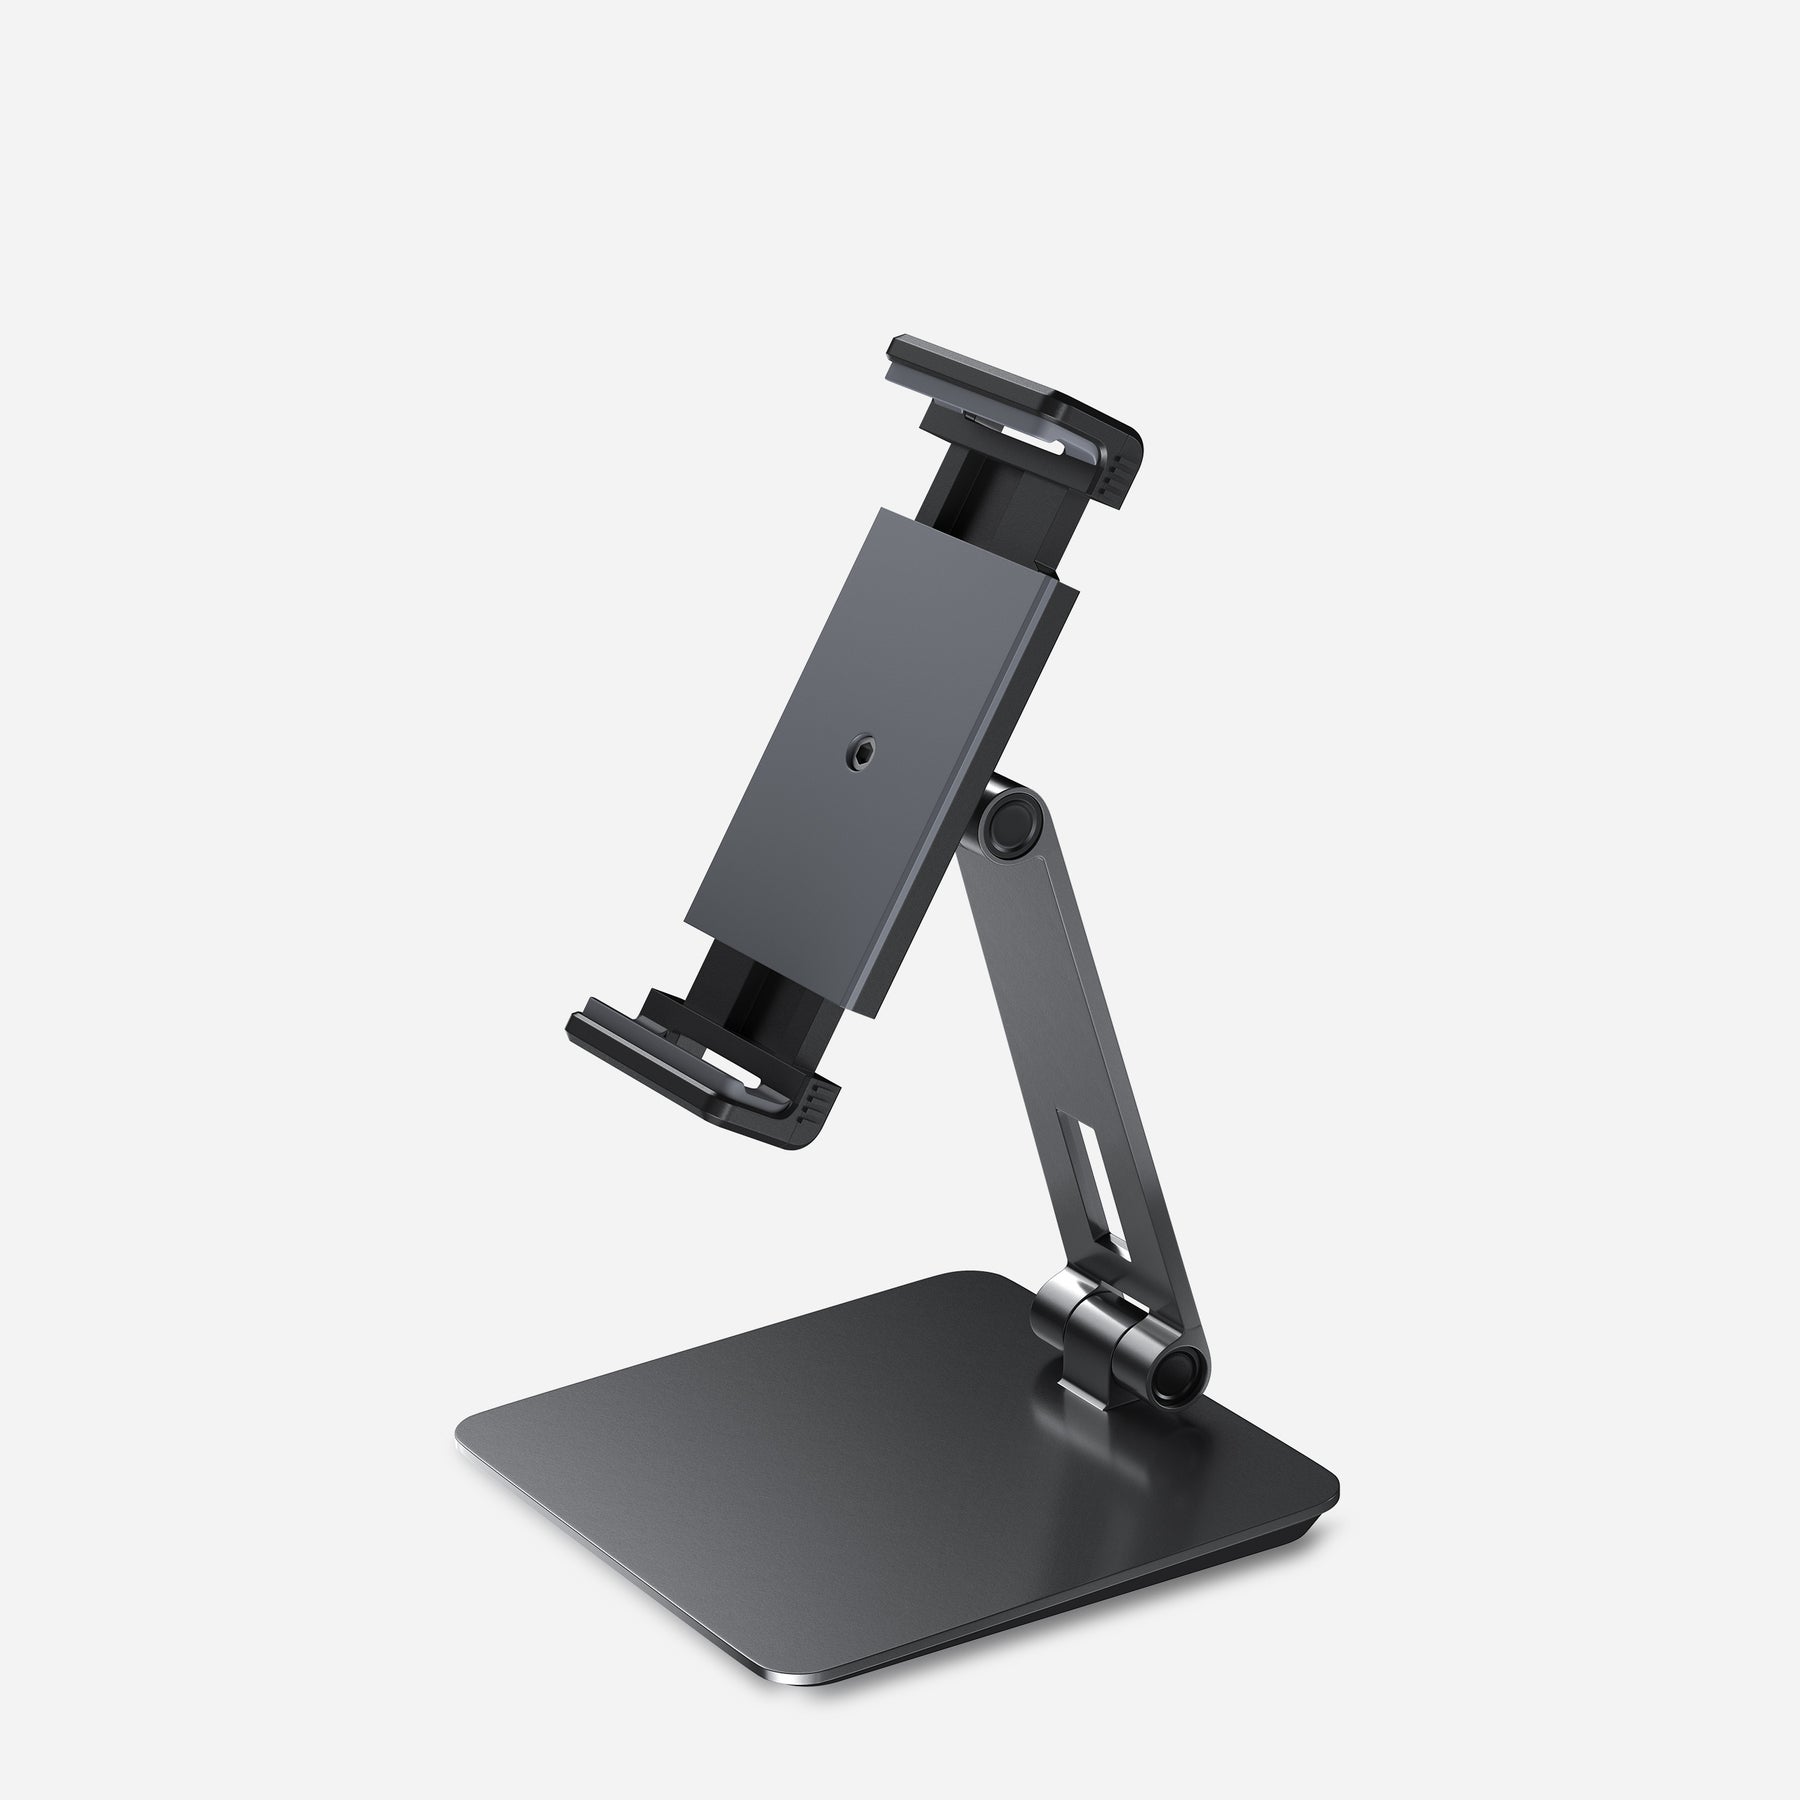 Matal Tablet Stand Compatible with iPad Pro/Air/Mini and other - Gray –  Maxonar Official